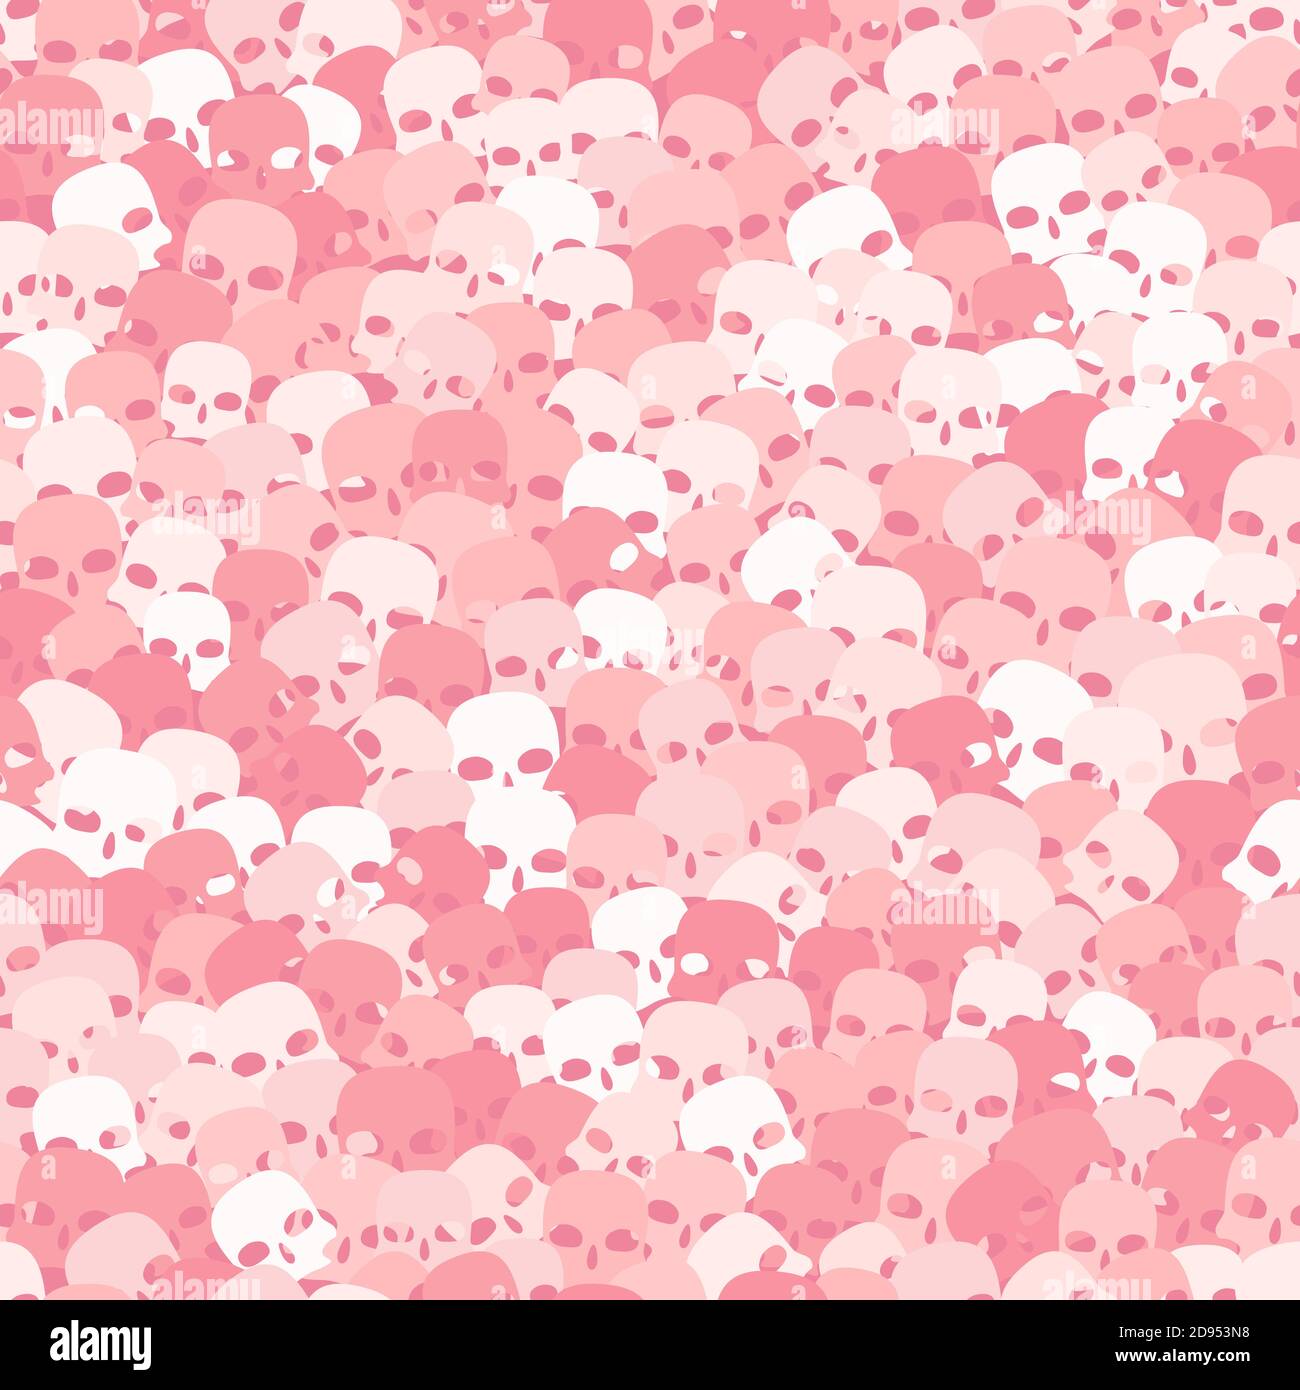 Cool skulls in white and pink halftone colors. Vector illustration of a skull Stock Vector